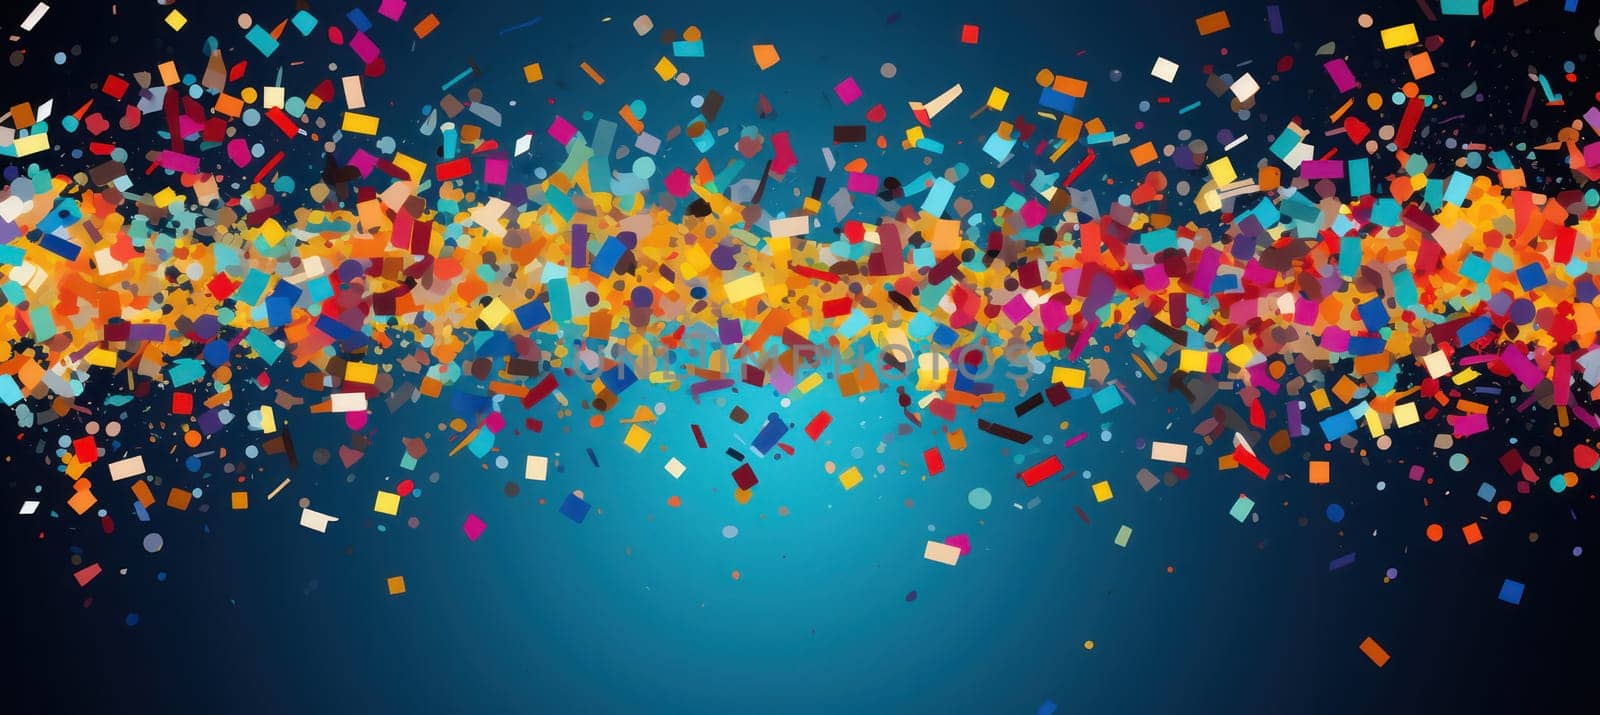 Colorful Confetti Celebration: Bright, Happy, and Fun Abstract Illustration on Blue Background by Vichizh